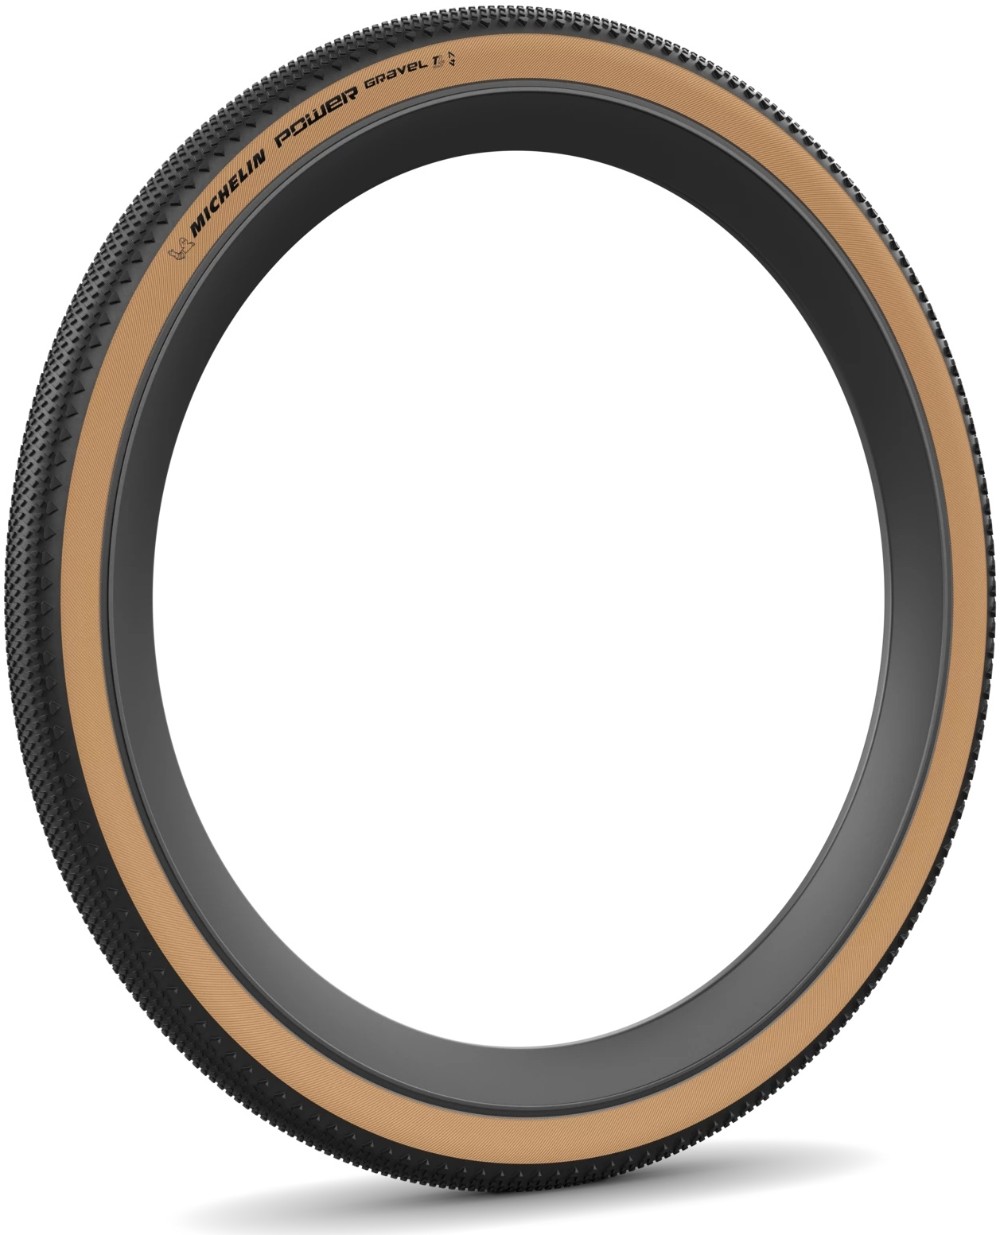 Power Gravel 650B TS TLR Tyre image 1